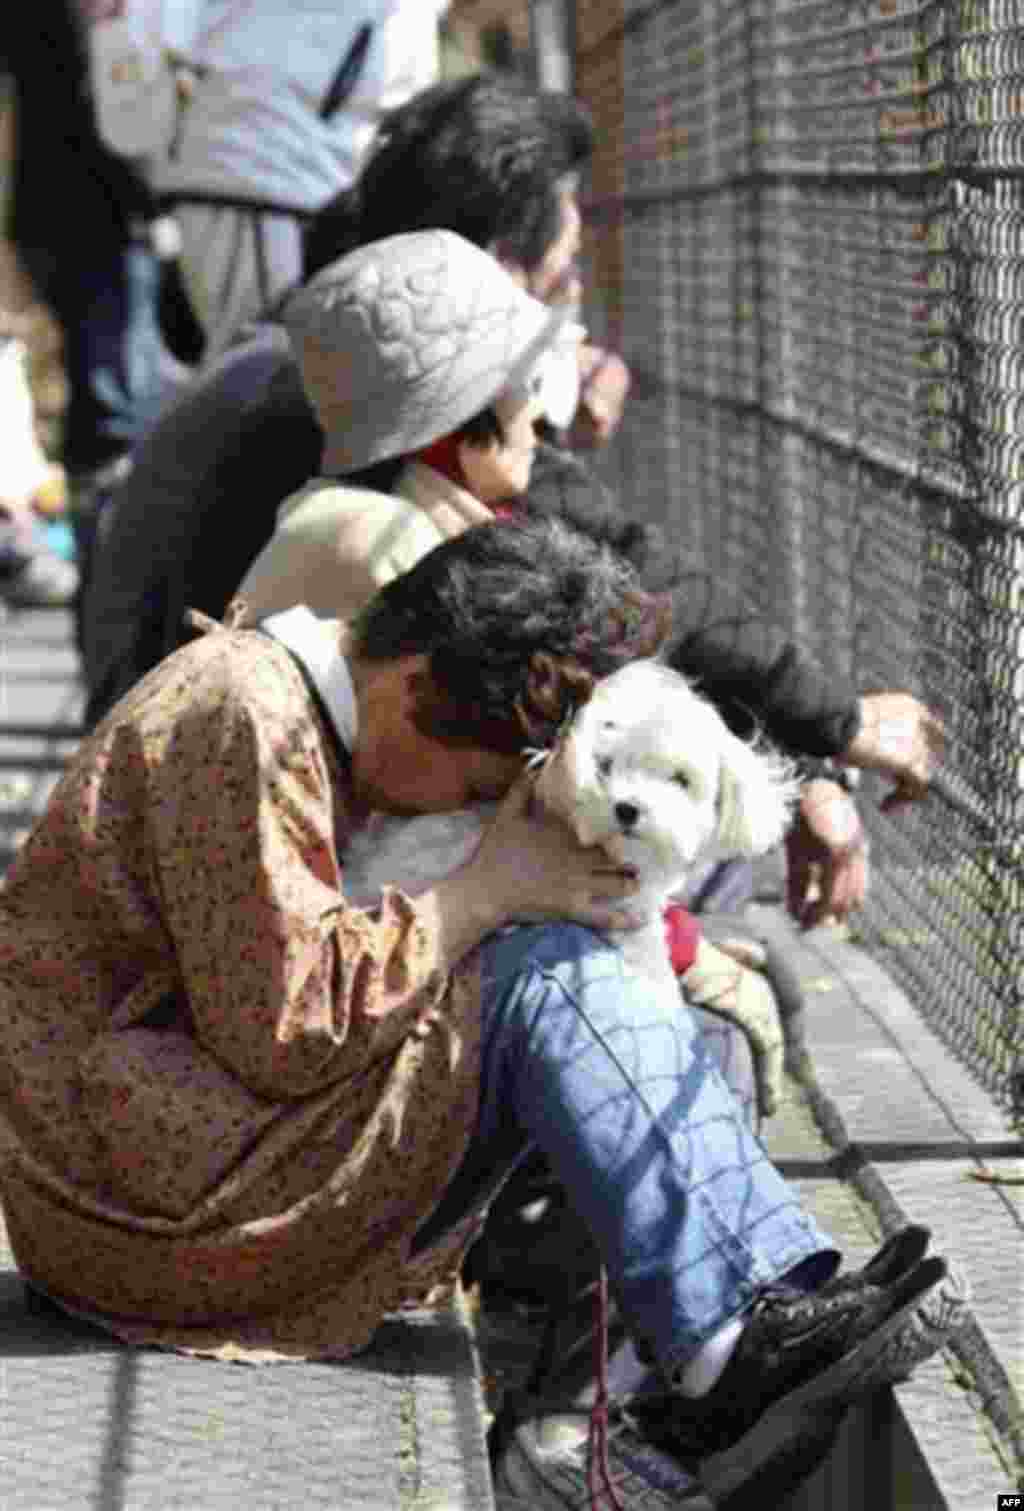 A woman holding her dog reacts after evacuating following a tsunami warning in Kamaishi, Iwate Prefecture, northern Japan, Monday, March 14, 2011, three days after a powerful earthquake-triggered tsunami hit the country's east coast. (AP Photo/The Yomiuri